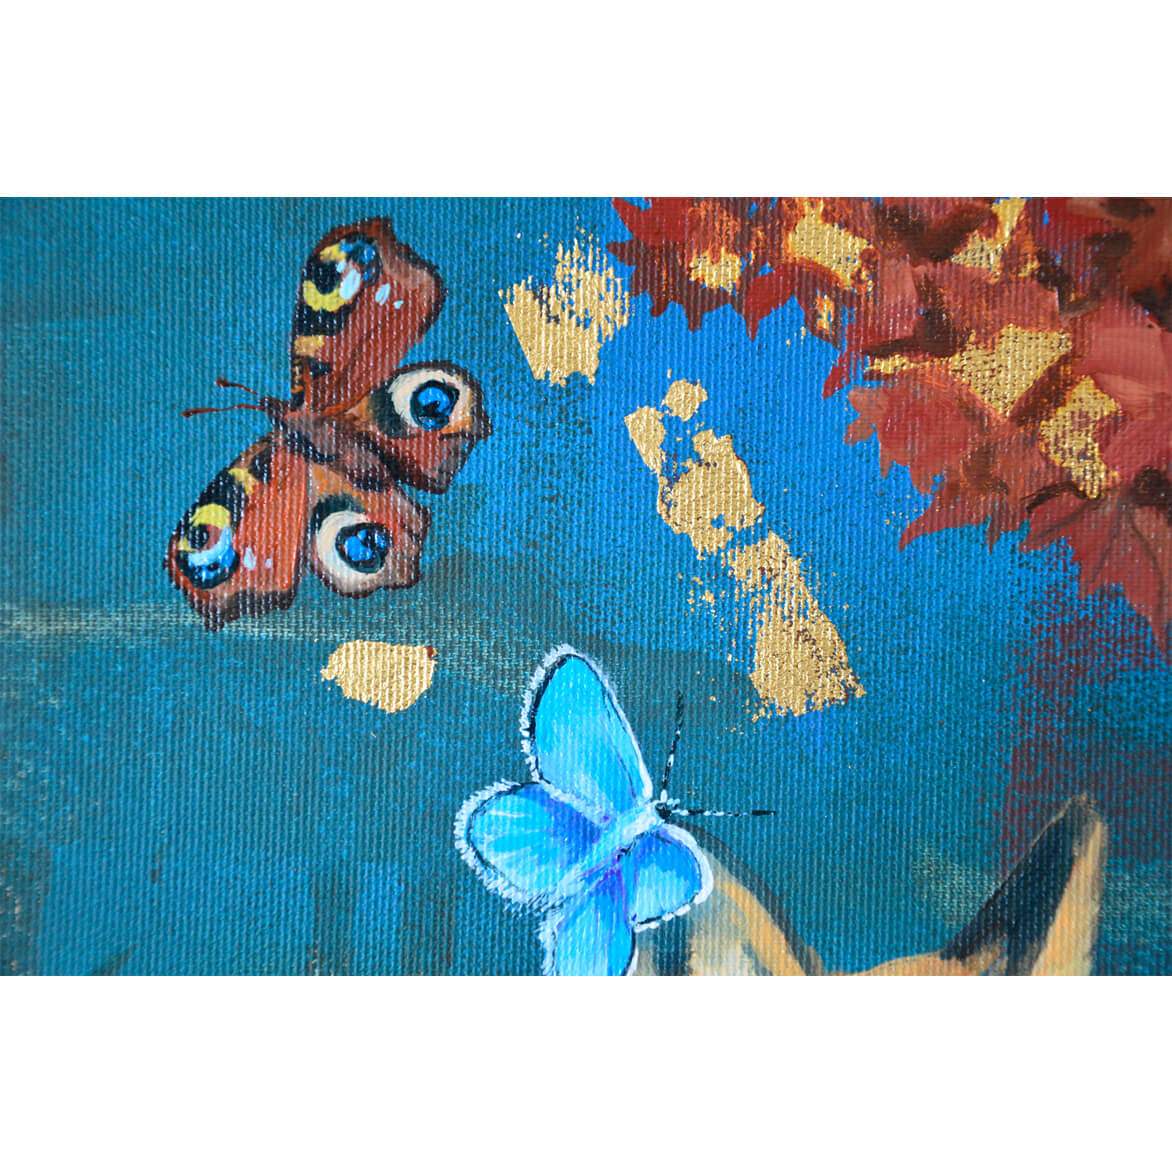 Portion of a painting with butterflies and gold leaf details.